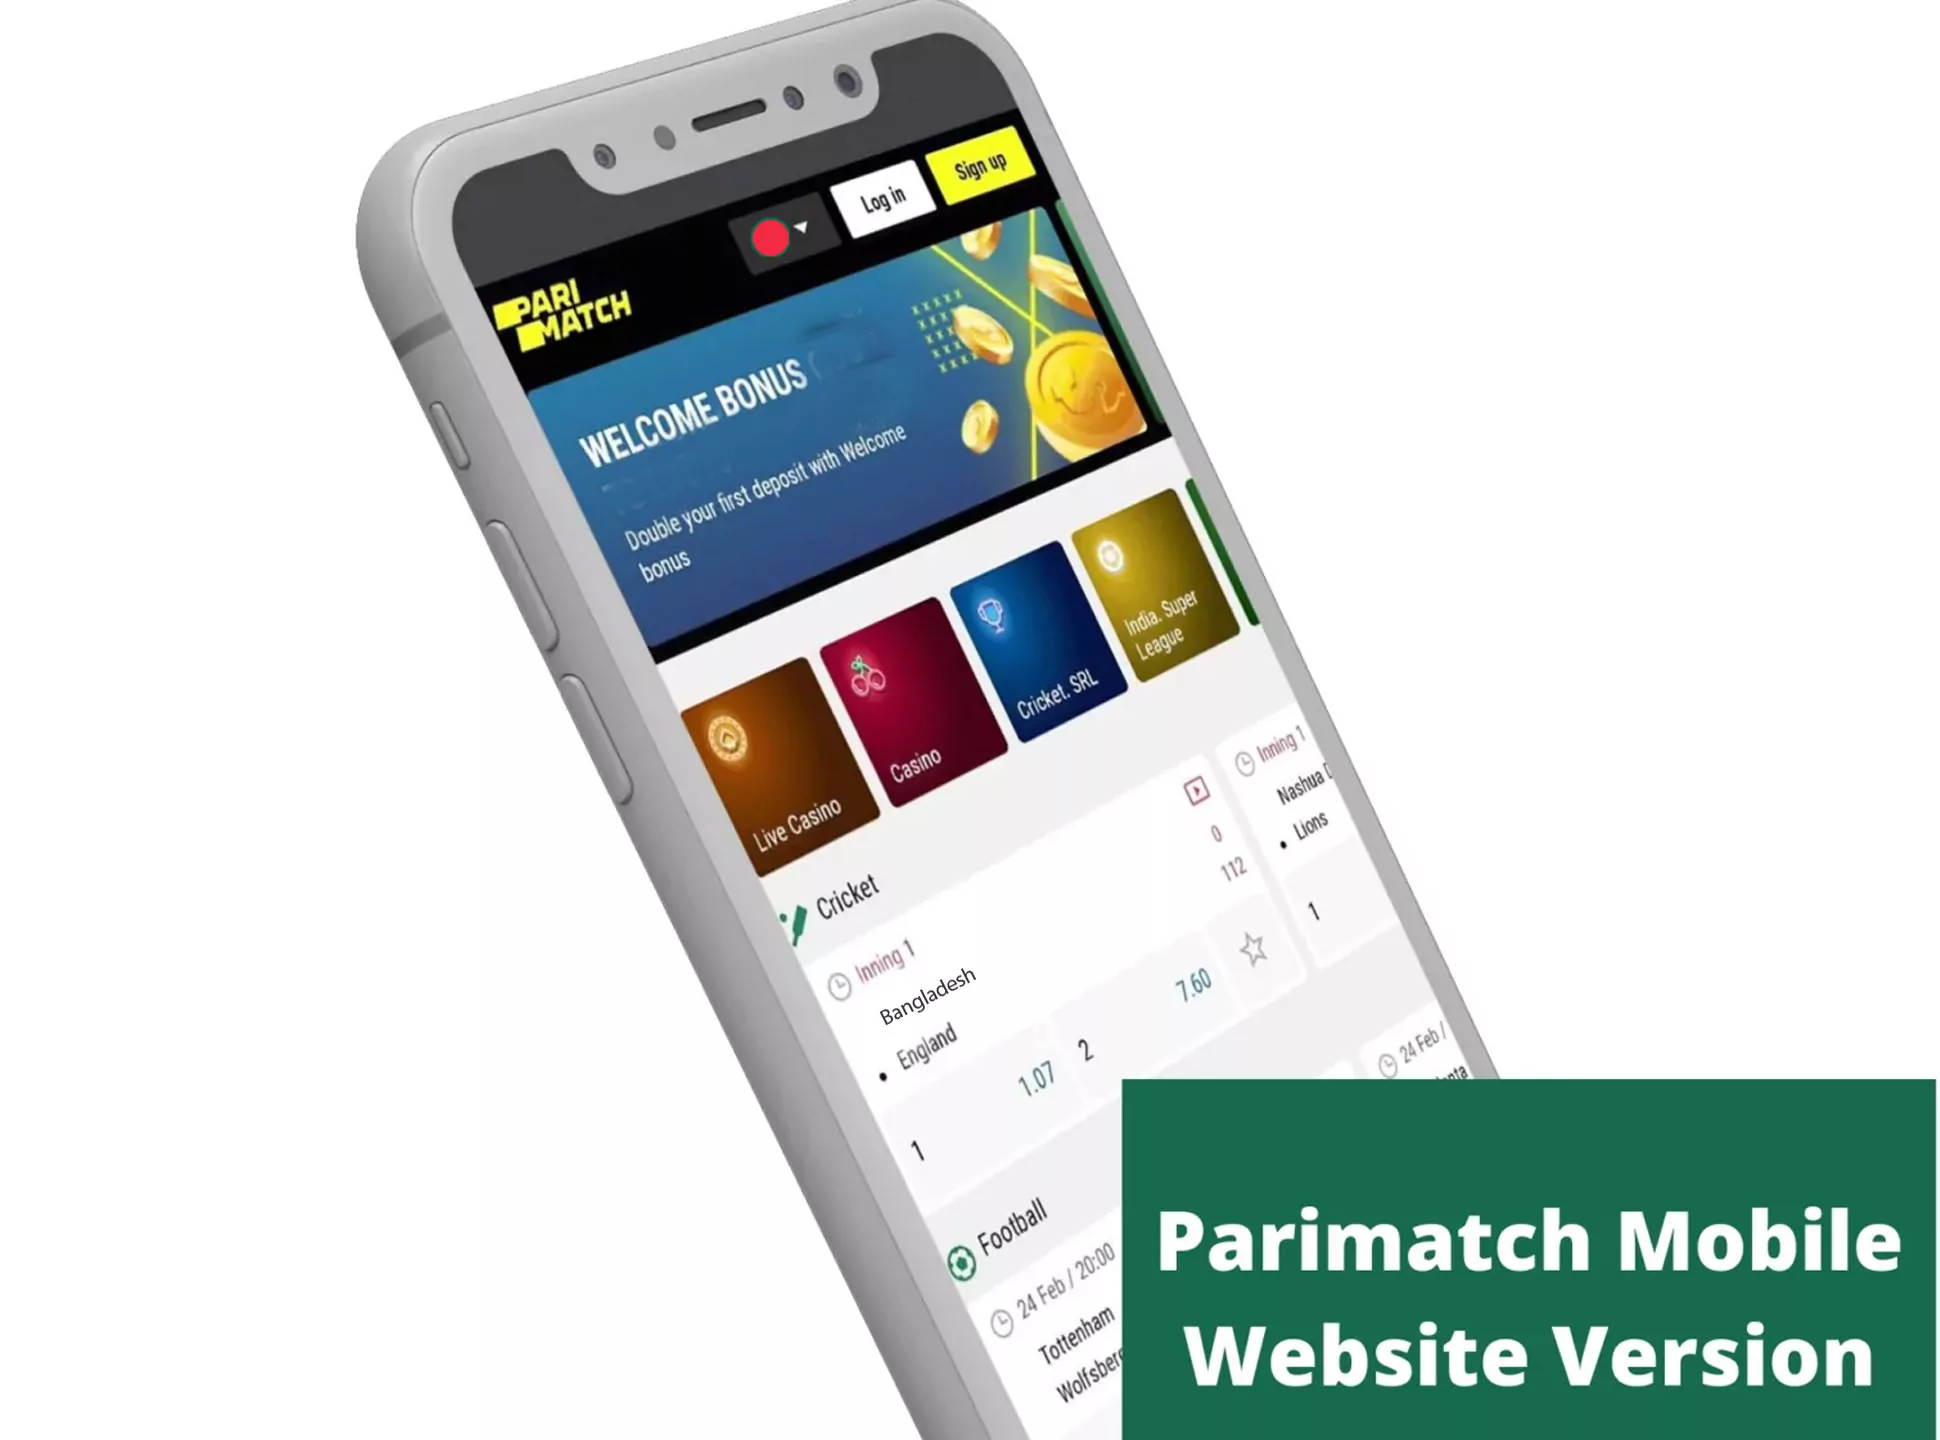 It is very useful to have Mobile Website Version.